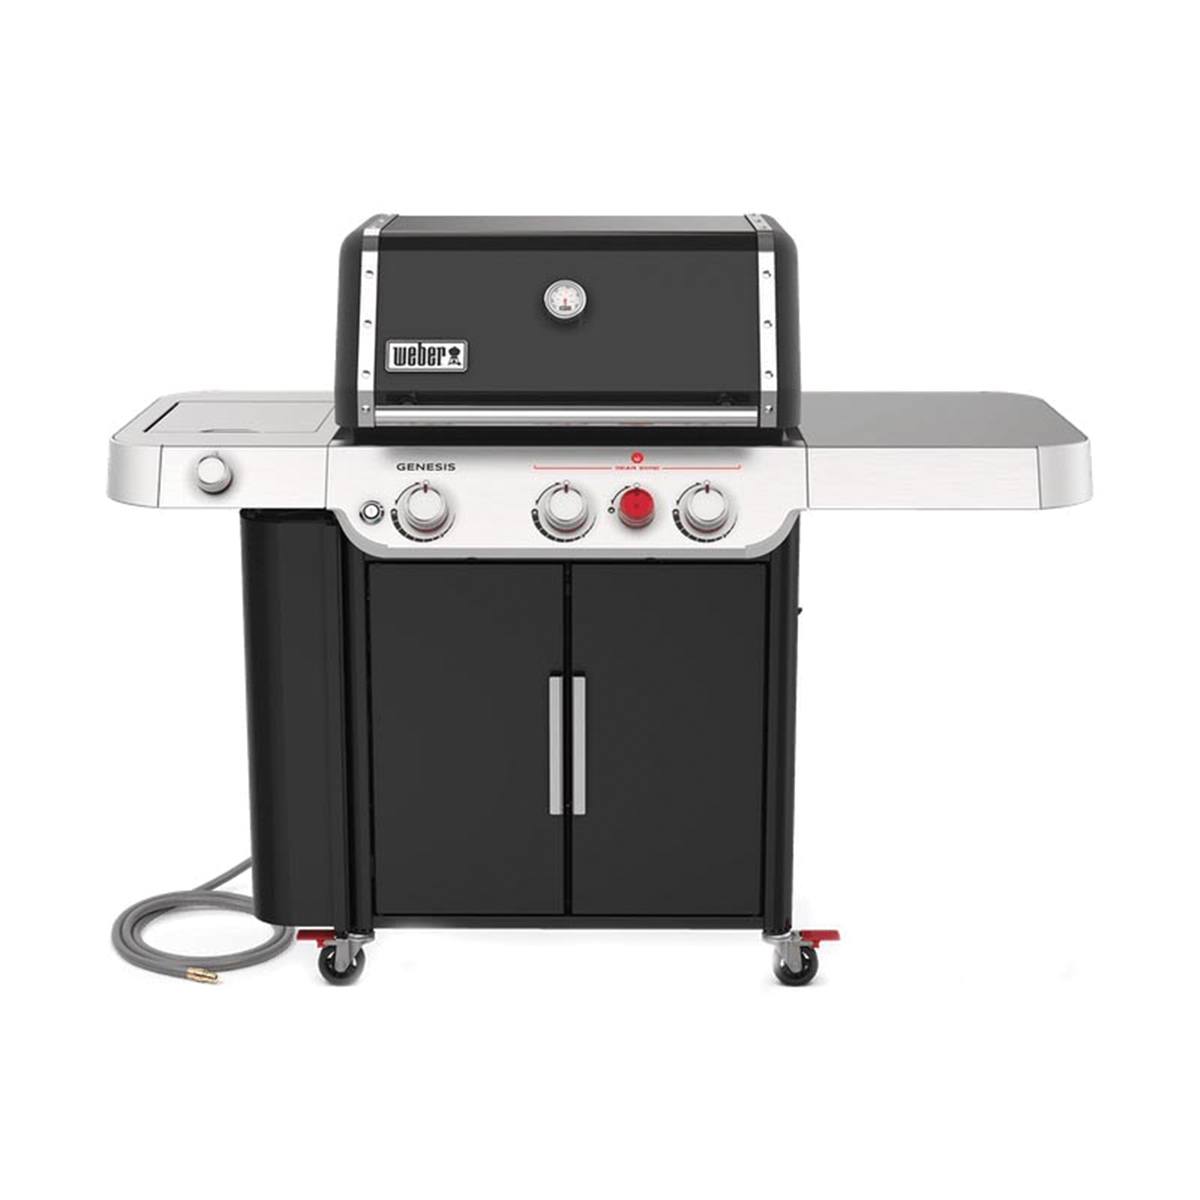 Weber GENESIS E-335 Series 37410001 Gas Grill, 39,000 Btu, Natural Gas, 3-Burner, 513 sq-in Primary Cooking Surface, 1/EA